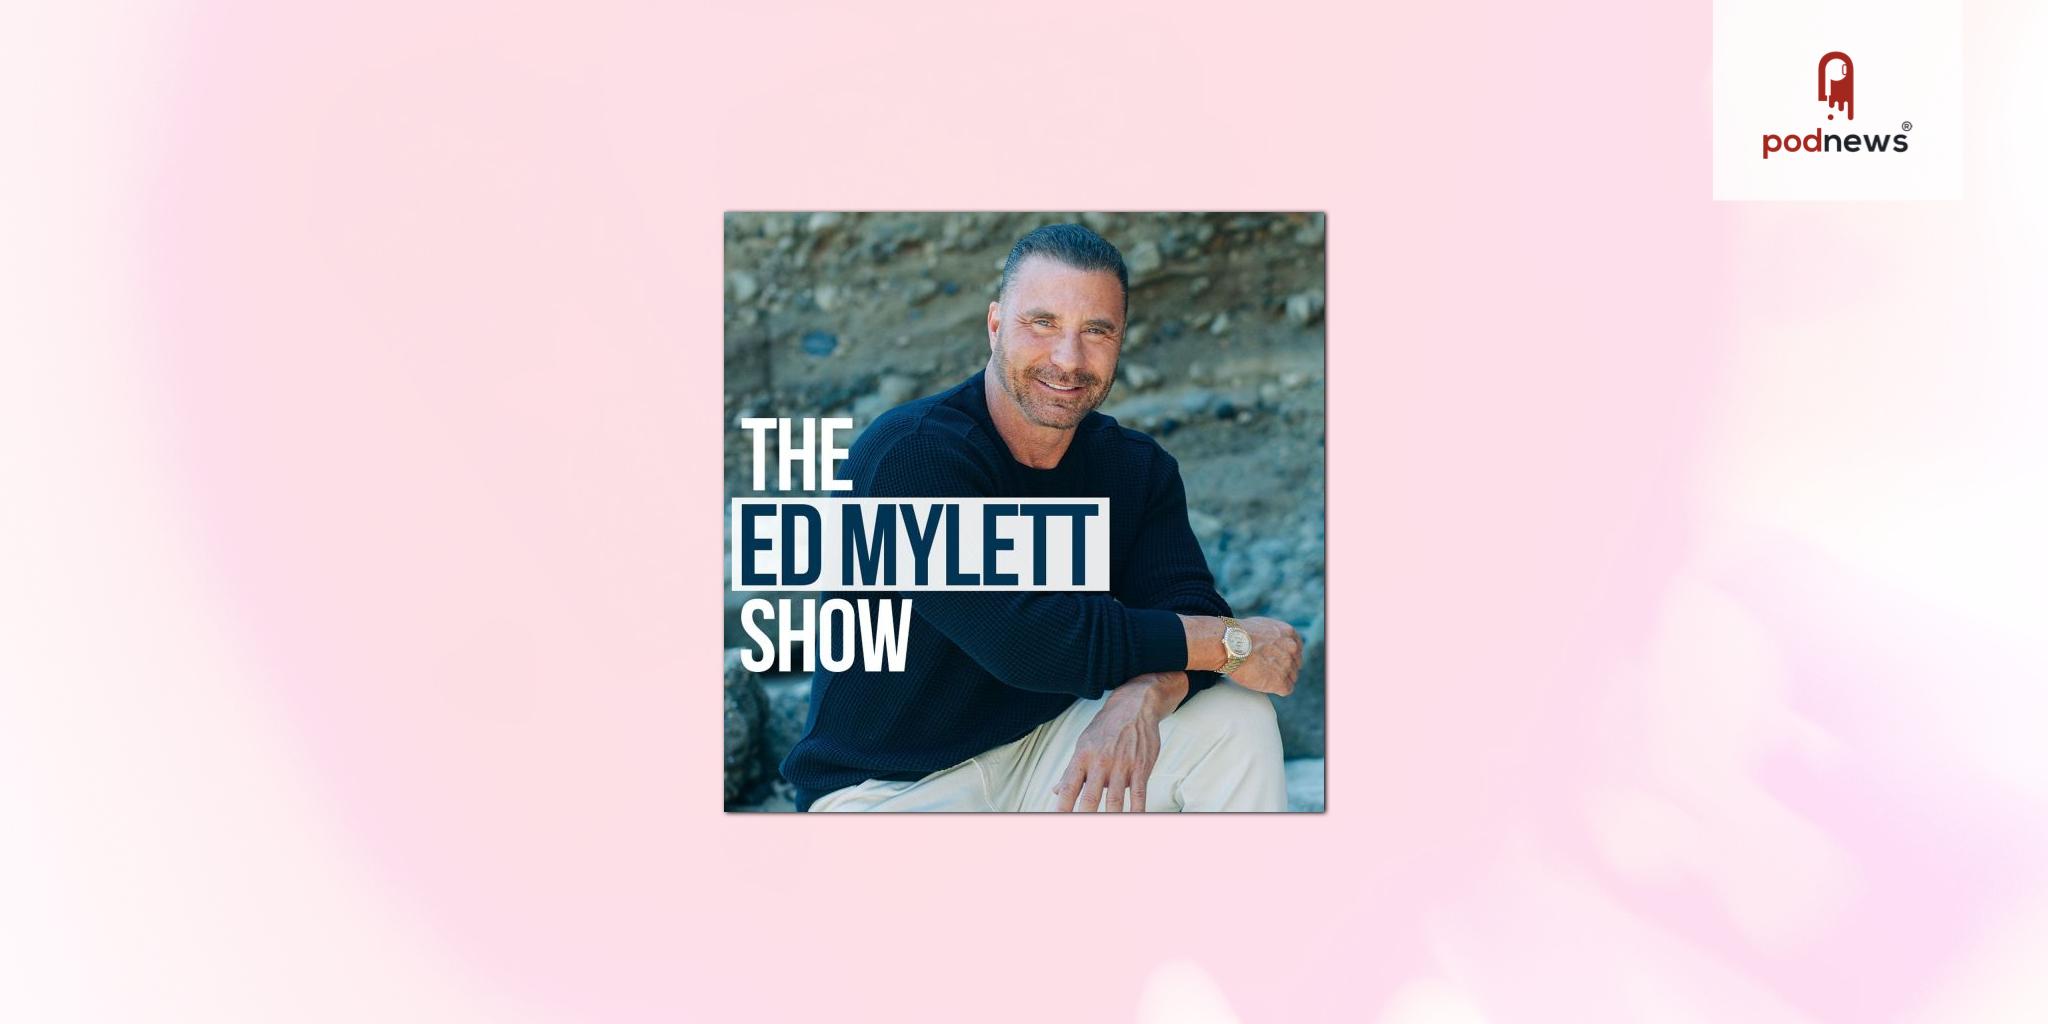 The Ed Mylett Show joins the Cumulus Podcast Network